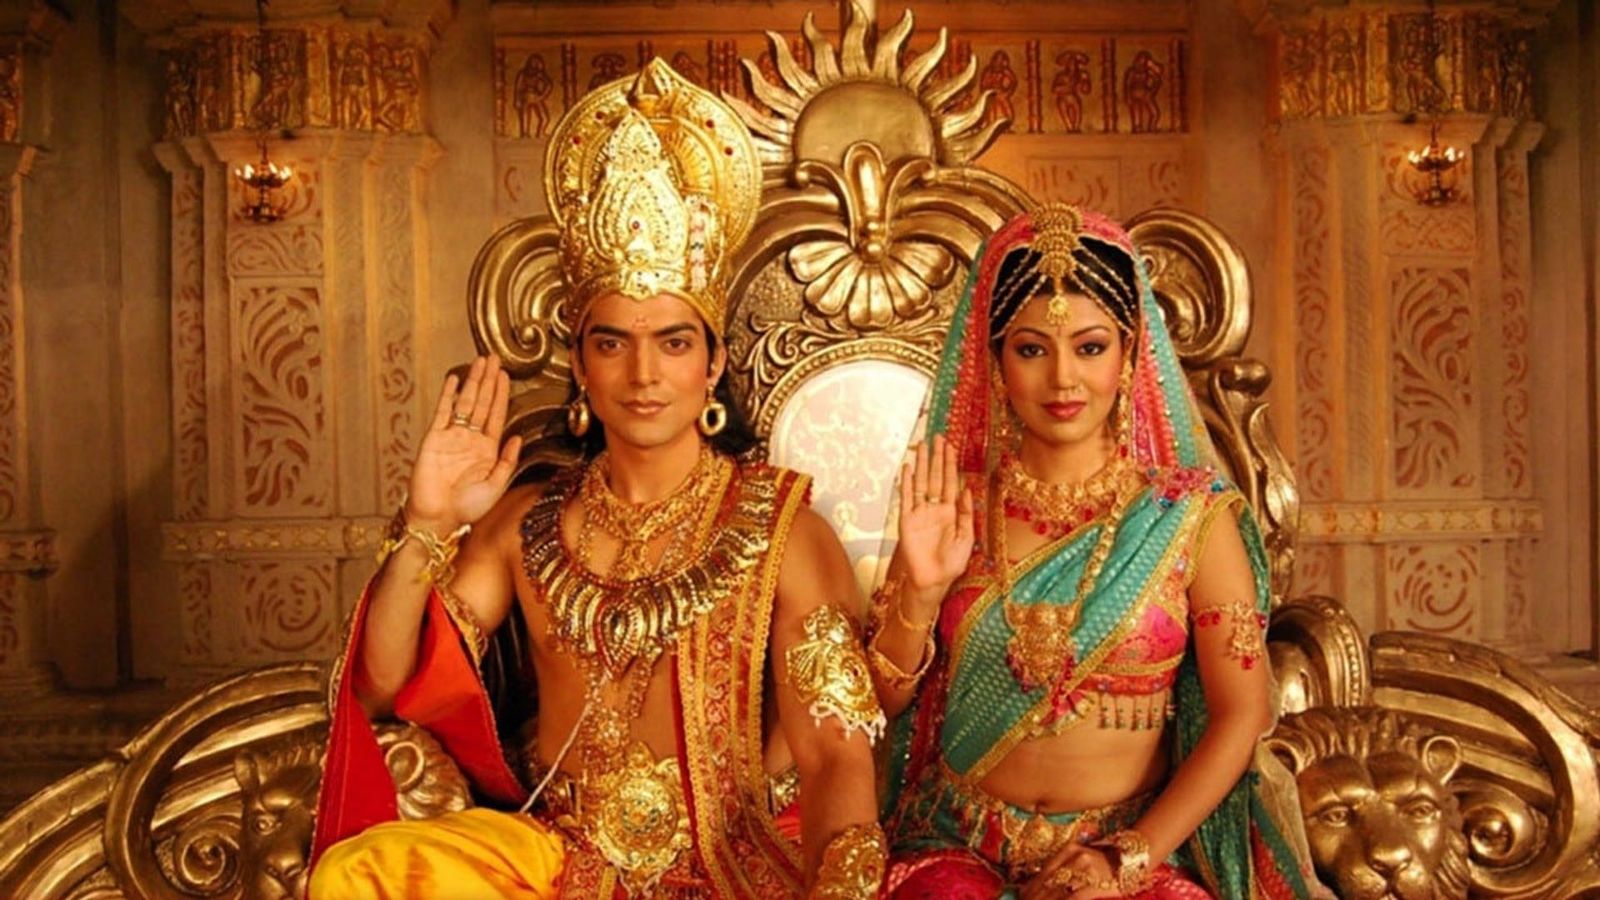 Ramayan Co-Stars Gurmeet Choudhary And Debina Bonnerjee Reveal They Swore To Never Work Together For This Reason